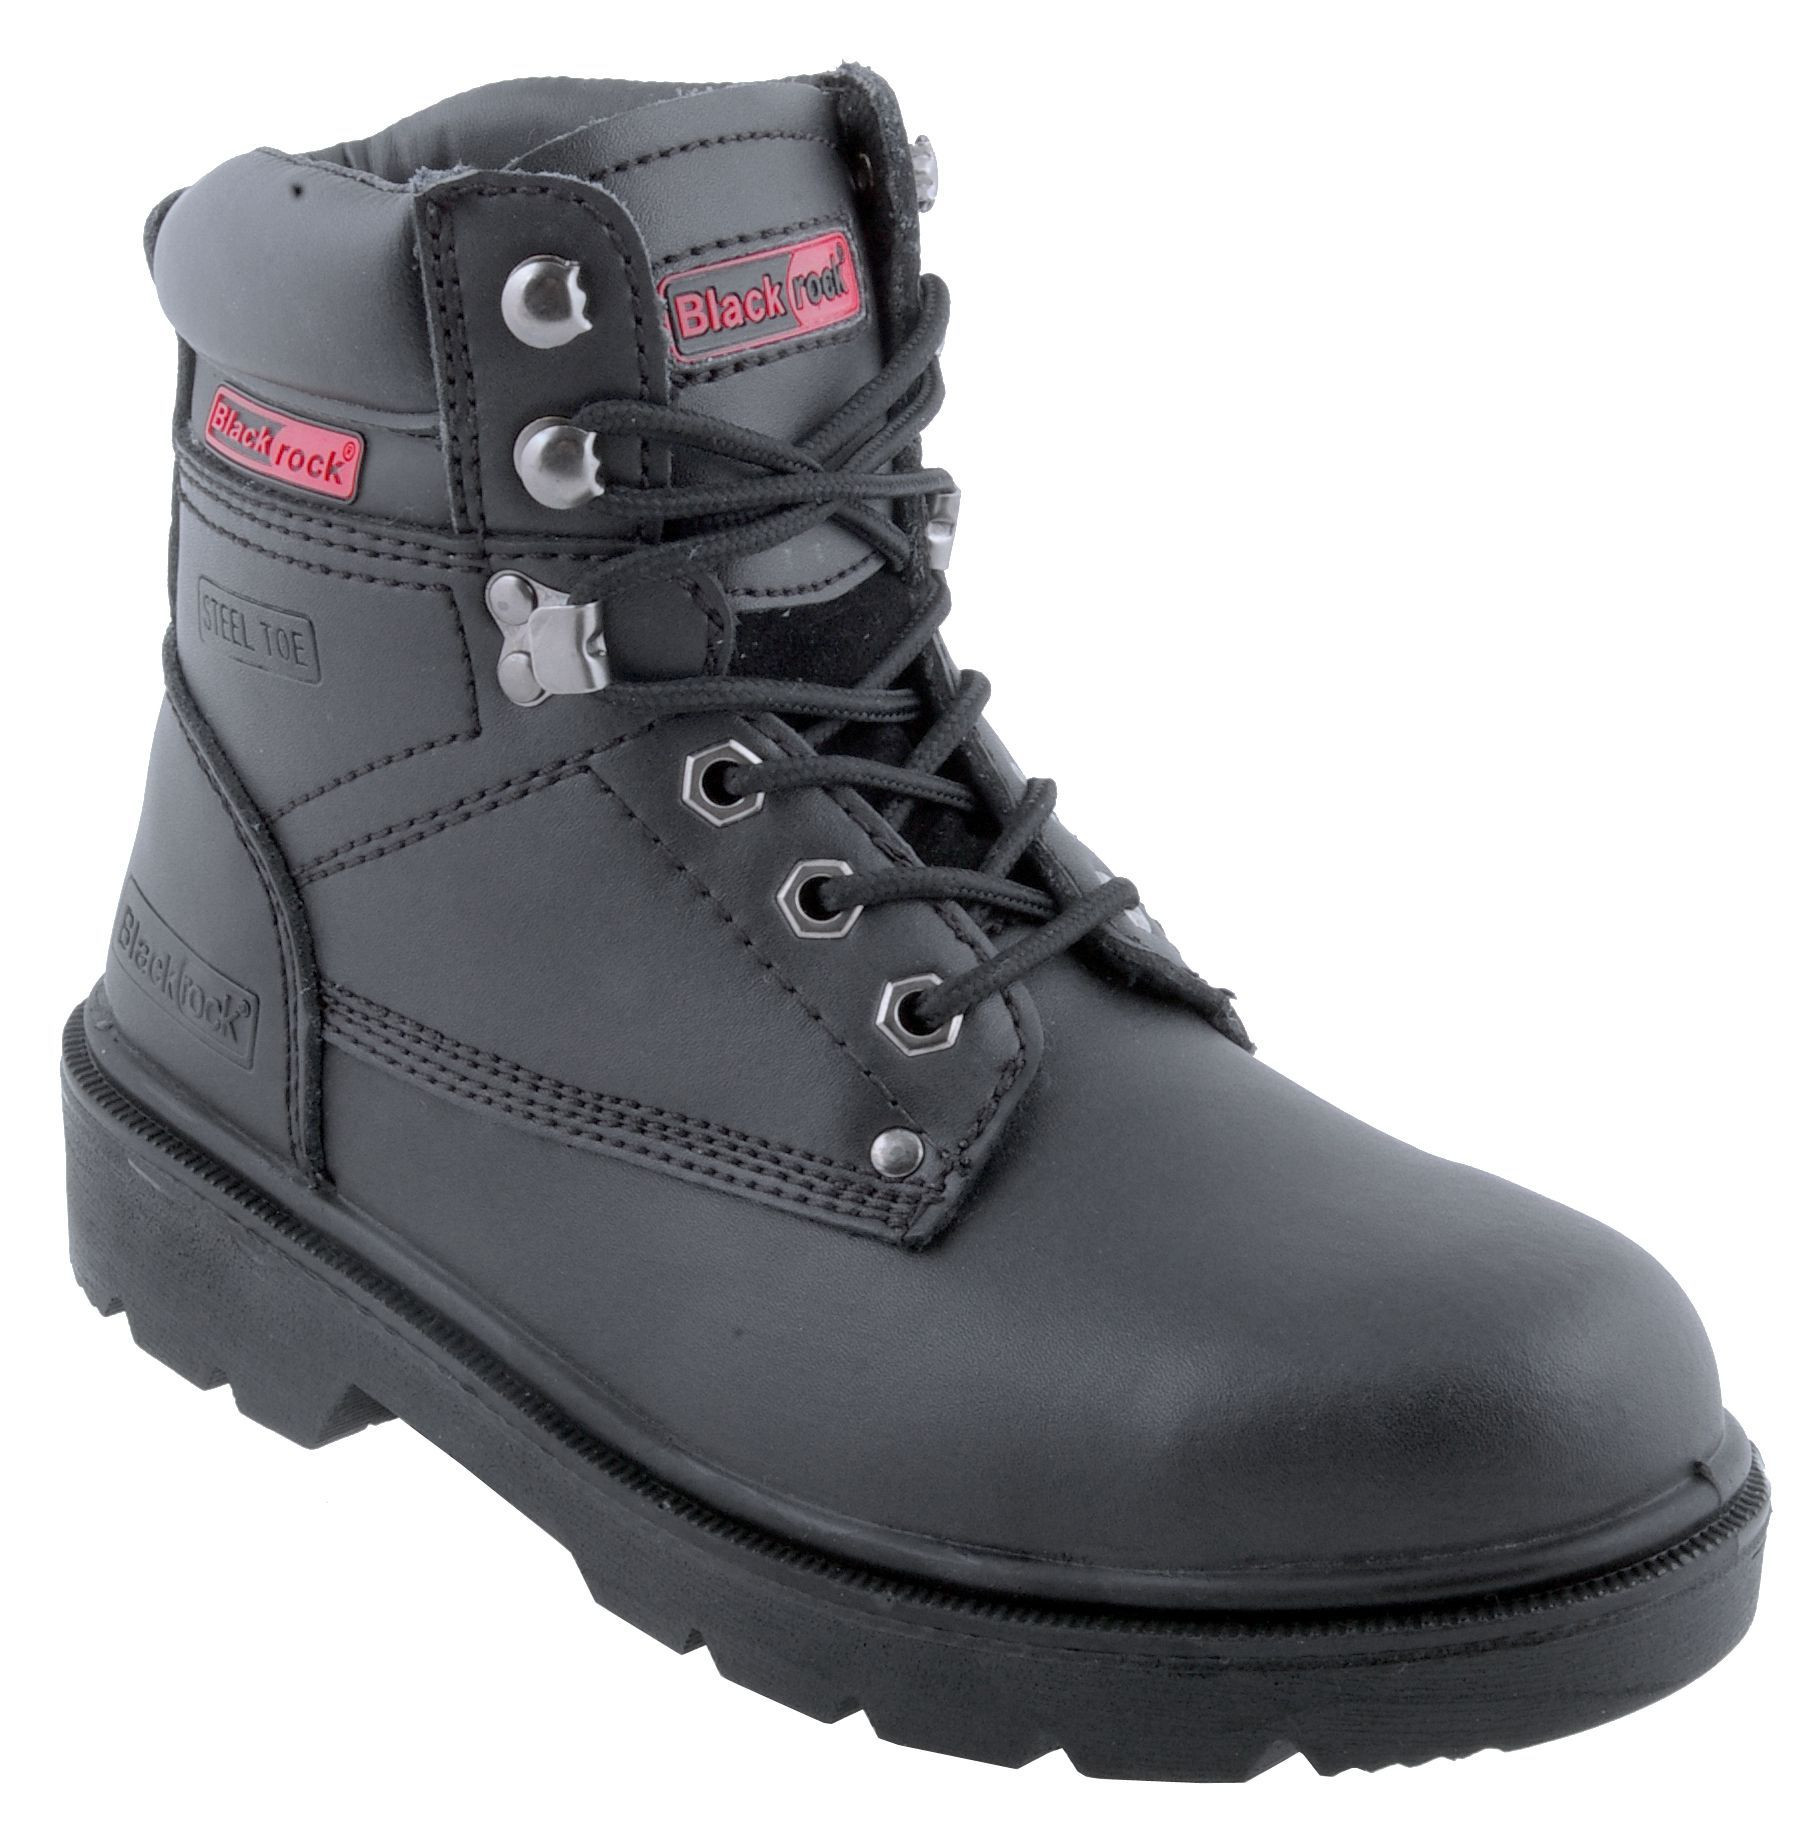 water and oil resistant boots